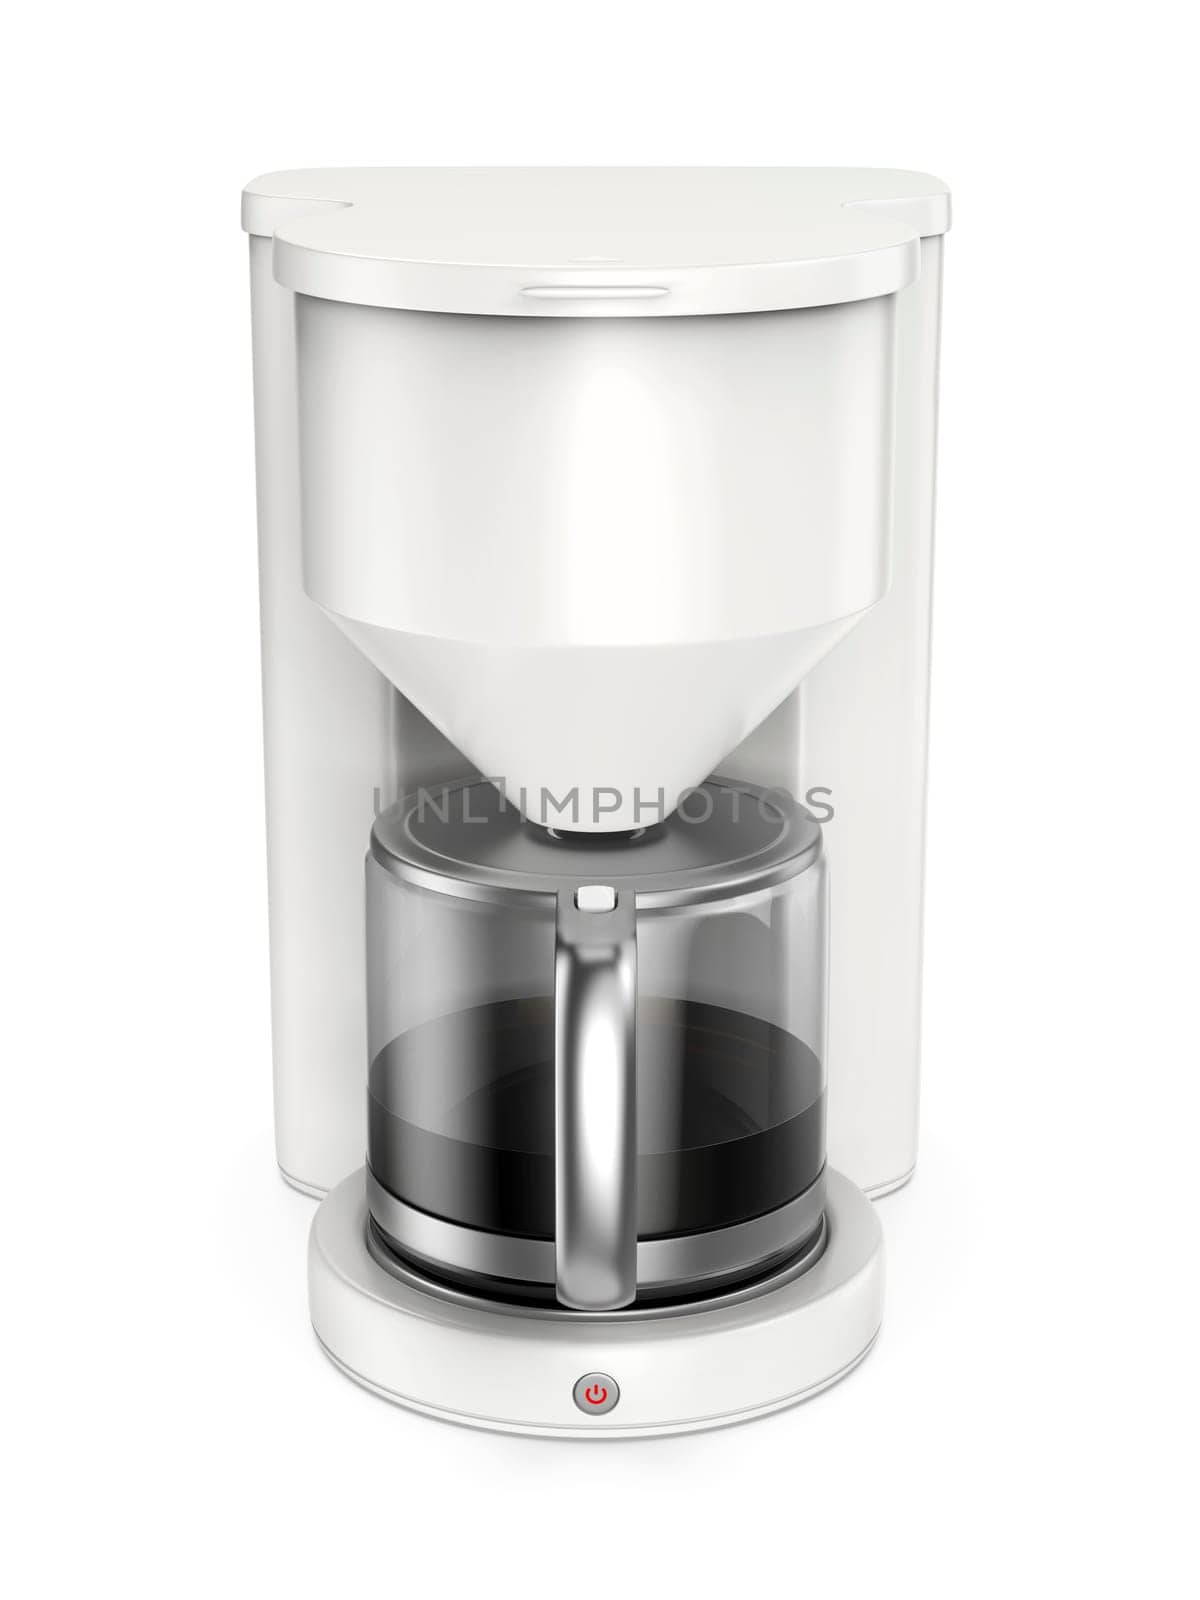 Filter coffee machine on white background, front view